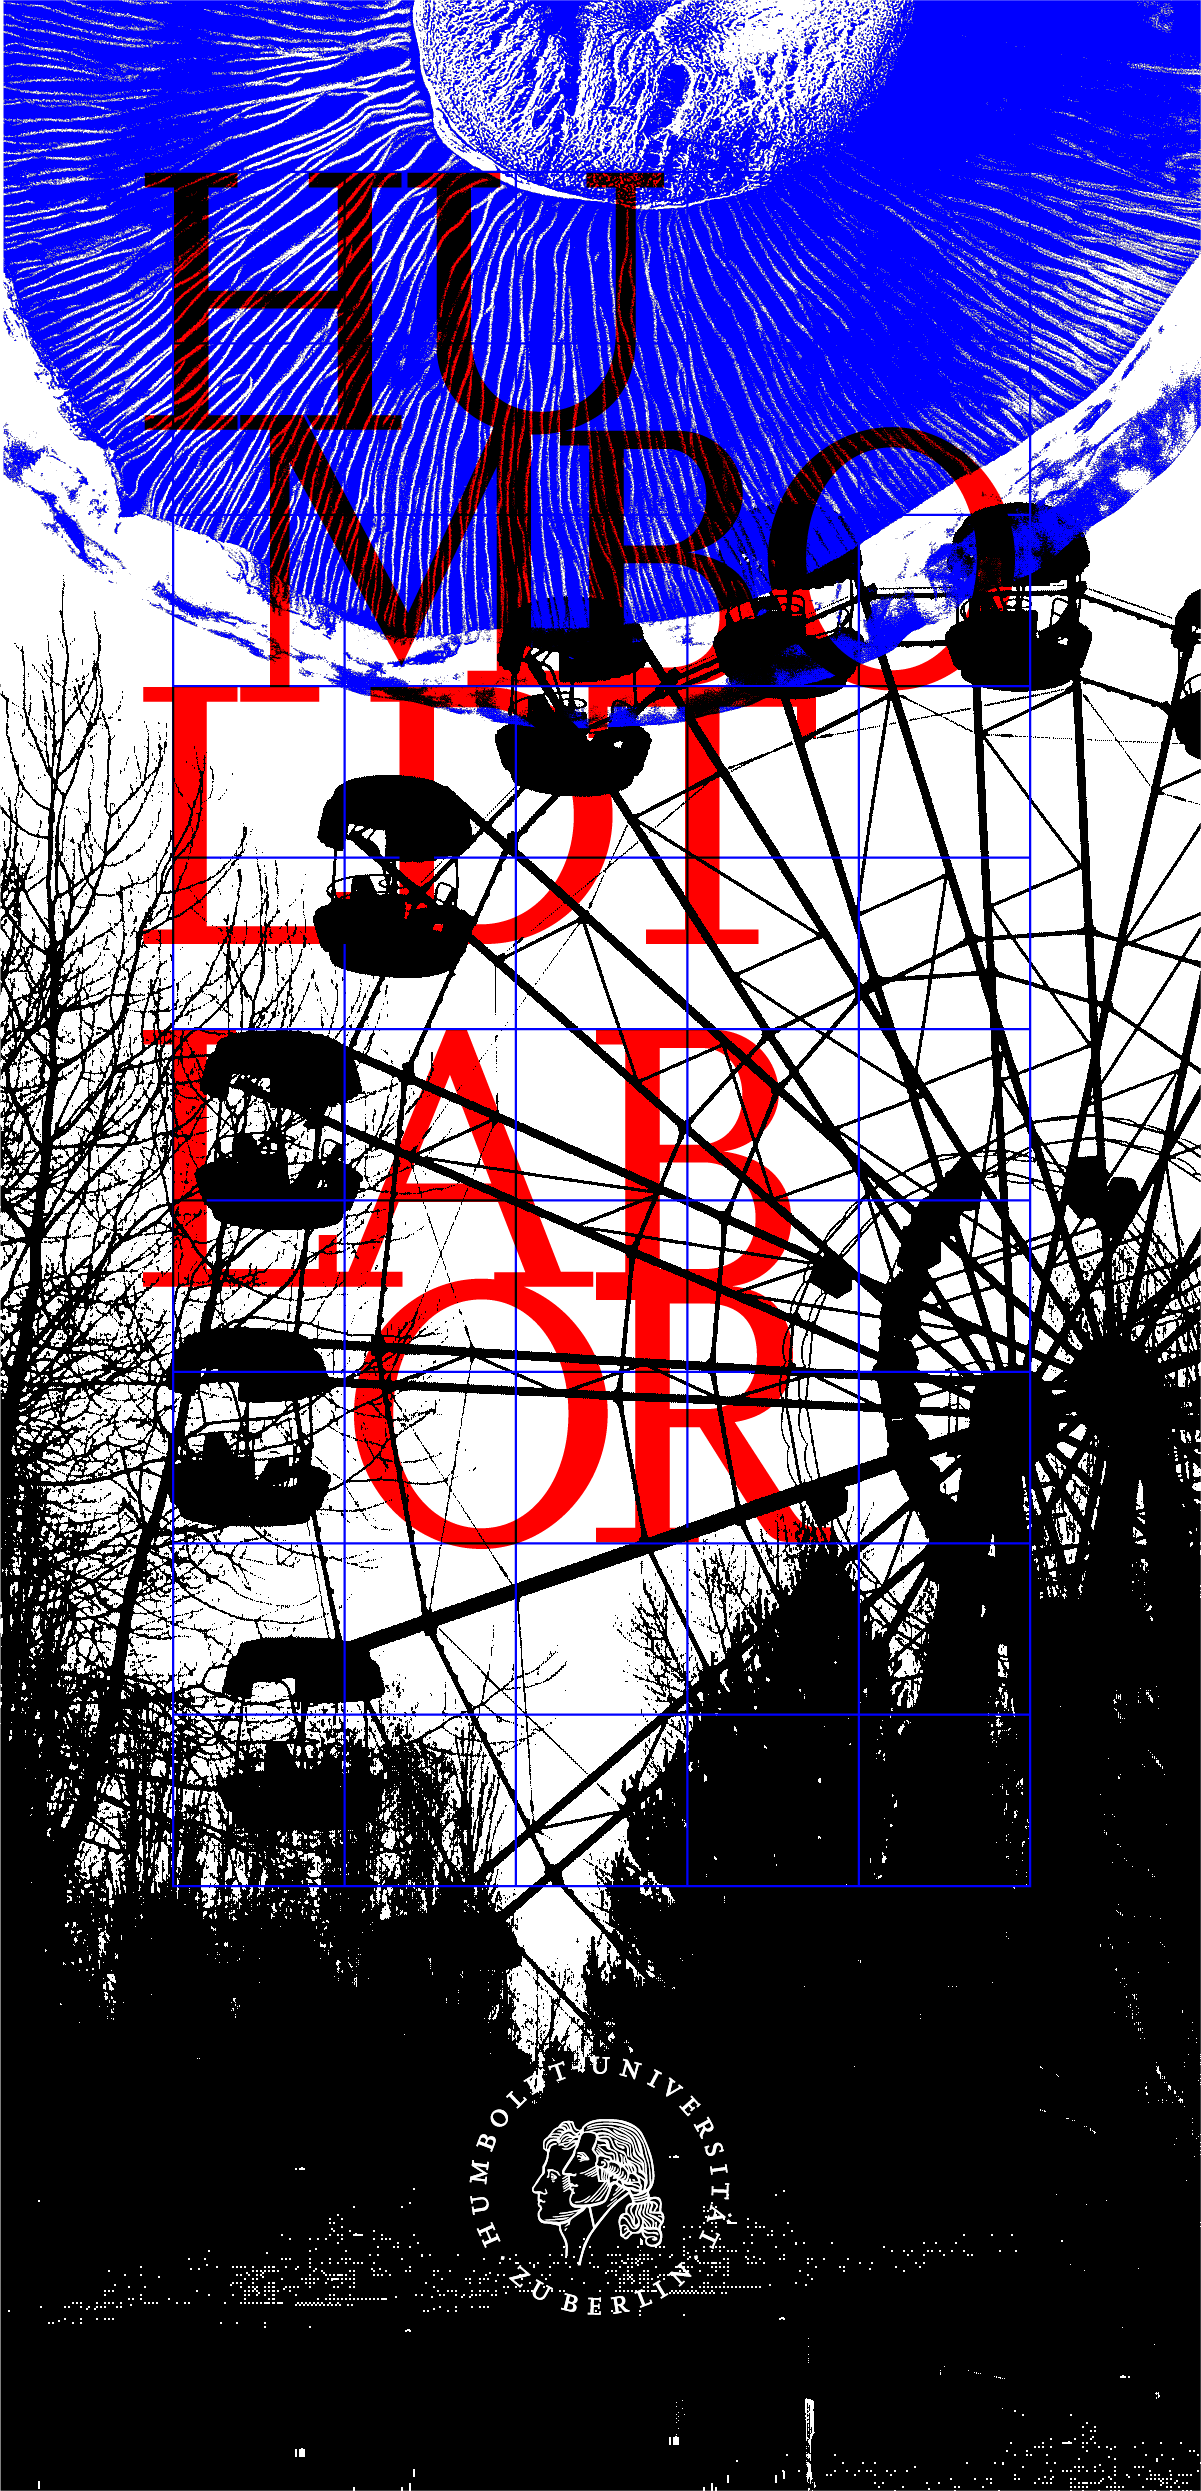 A collage illustration featuring the bottom view of mushroom lamellas in blue, the giant wheel of Prypiat / Chernobyl on the right and a grid on top. Huge red letters say: 